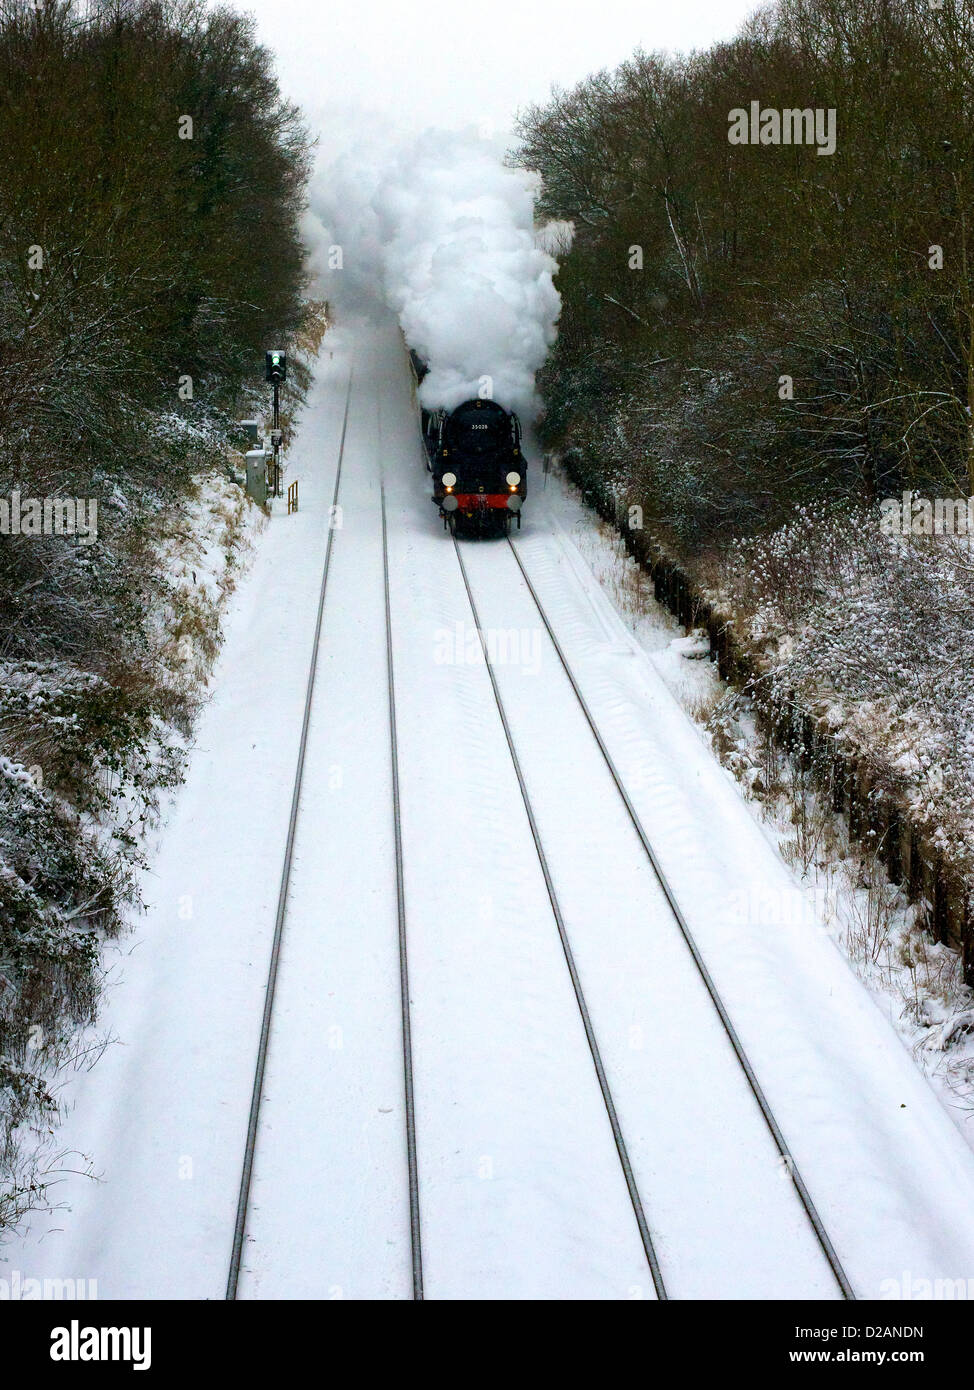 The VS Orient Express Steam Locomotive SR Merchant Navy Clan Line Class 4-6-2 No 35028 speeds through snowy Reigate in Surrey, 1501hrs Friday 18th January 2013 en route to London Victoria, UK. Photo by Lindsay Constable/Alamy Live News Stock Photo